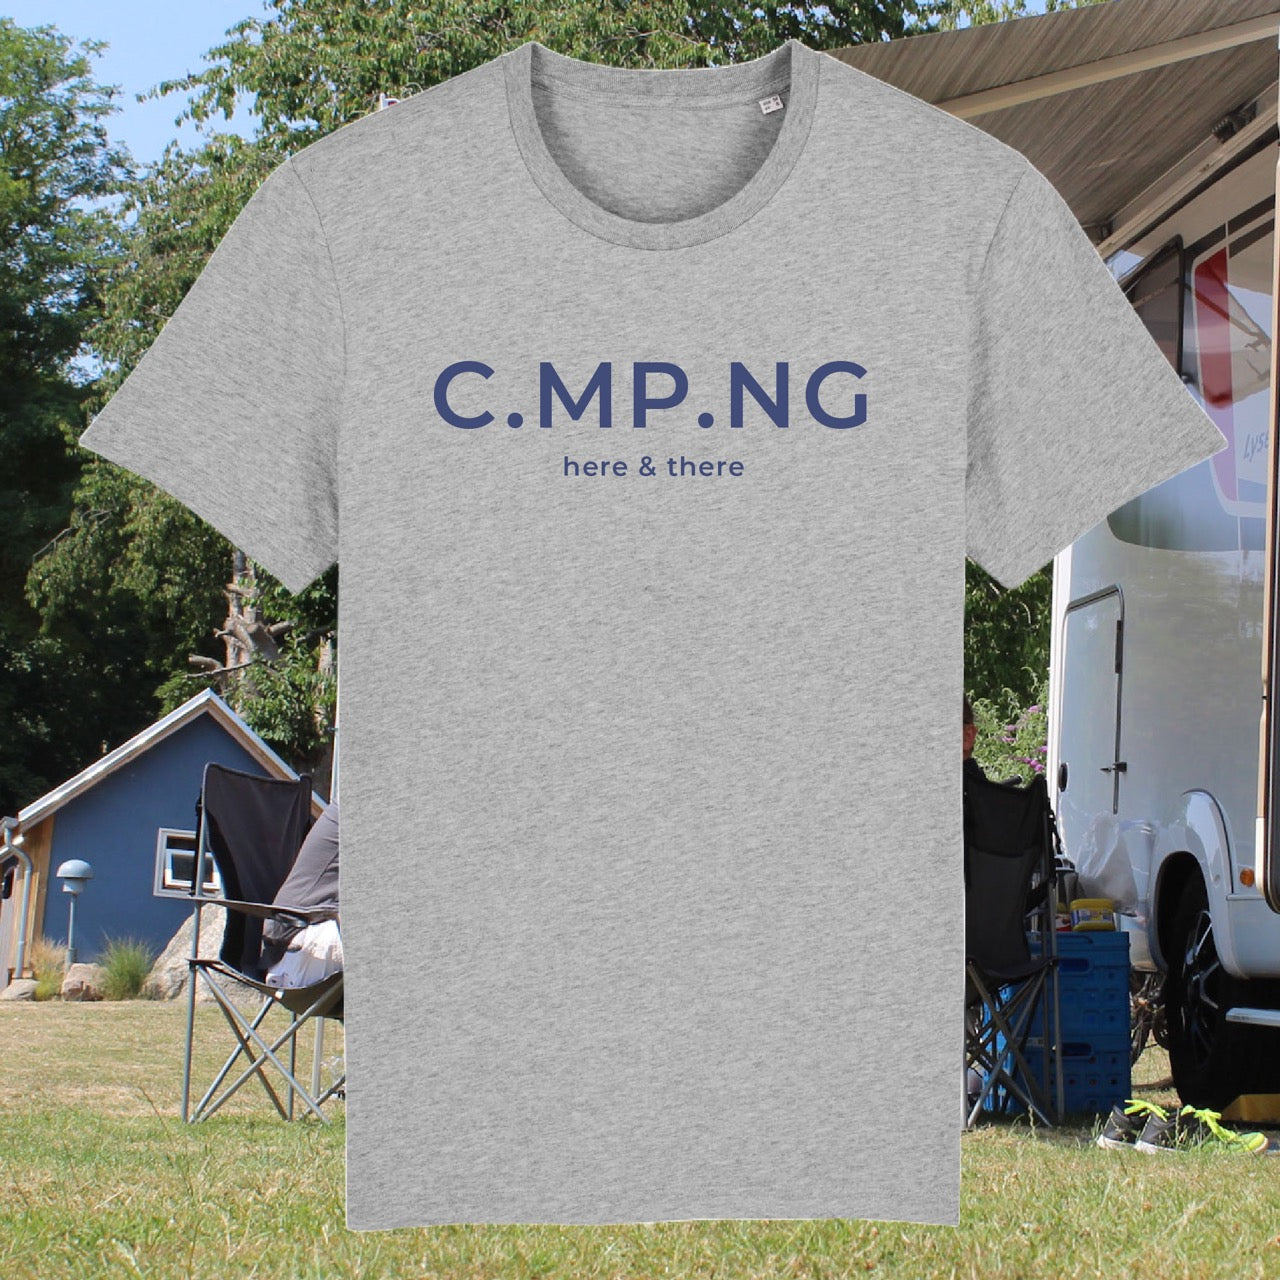 Camping T-Shirt in hellgrau mit dunkelblauem Aufdruck C.MP.NG here & there